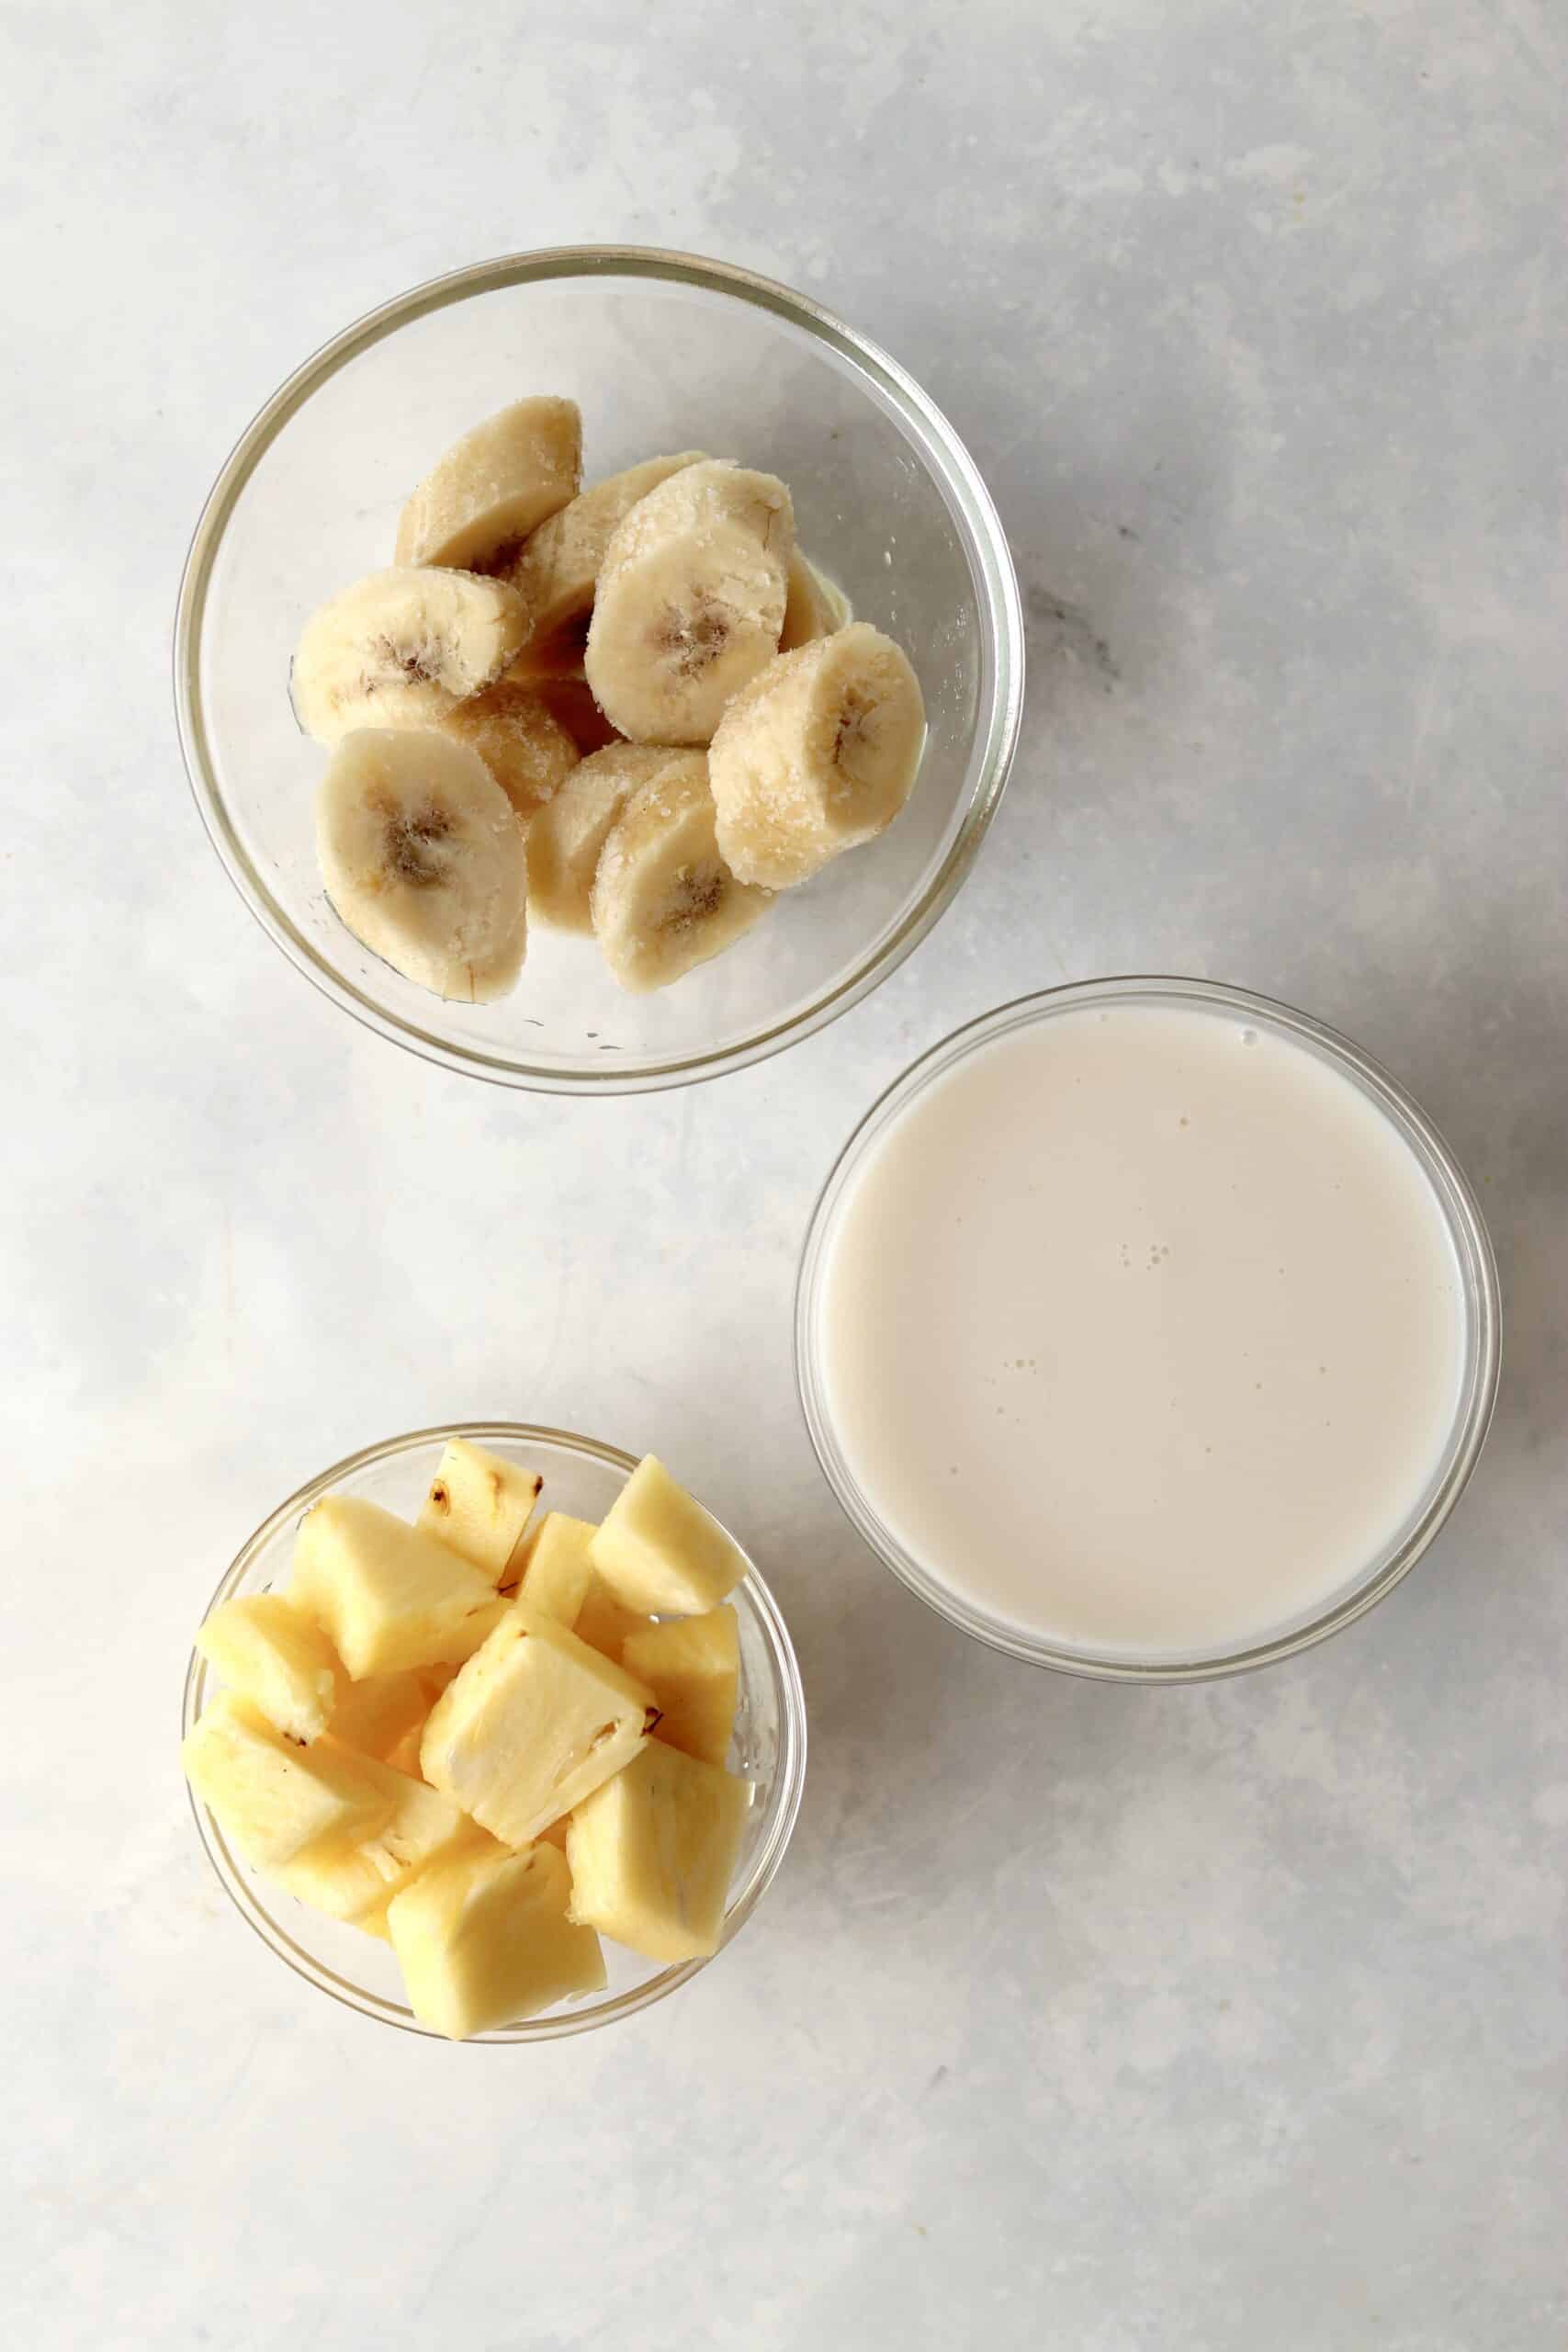 frozen banana, pineapple chunks, and almond milk in bowls